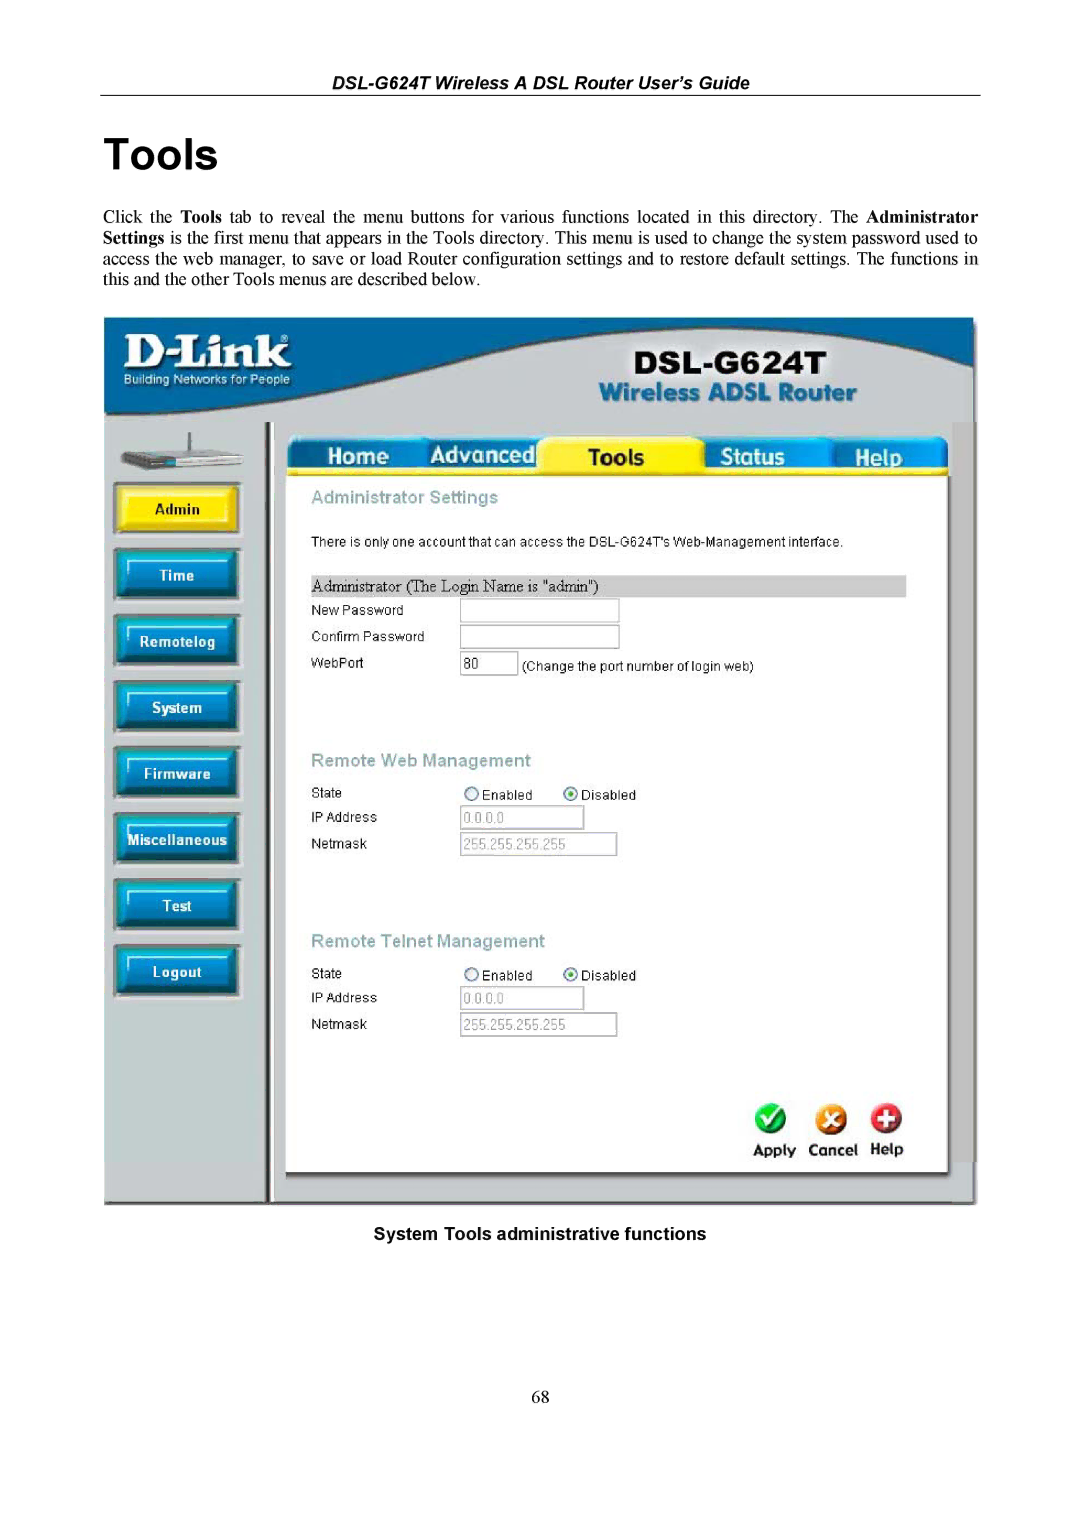 D-Link DSL-G624T, D-Link Wireless ADSL Router manual System Tools administrative functions 